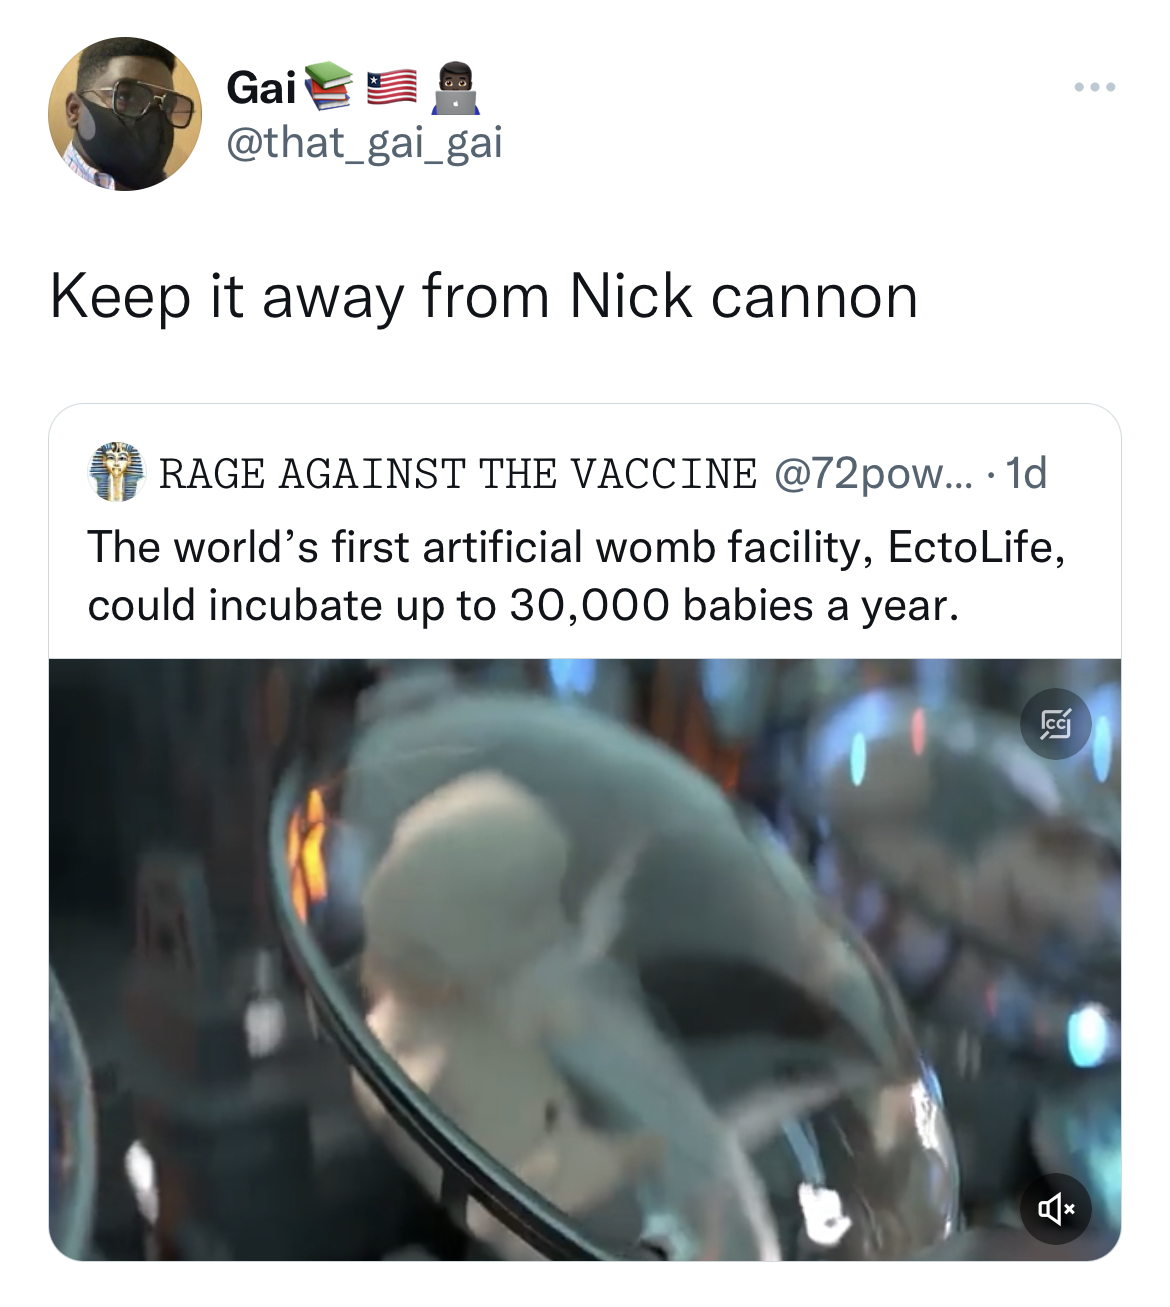 Tweets roasting celebs - website - Gai Keep it away from Nick cannon Rage Against The Vaccine .... 1d The world's first artificial womb facility, EctoLife, could incubate up to 30,000 babies a year.